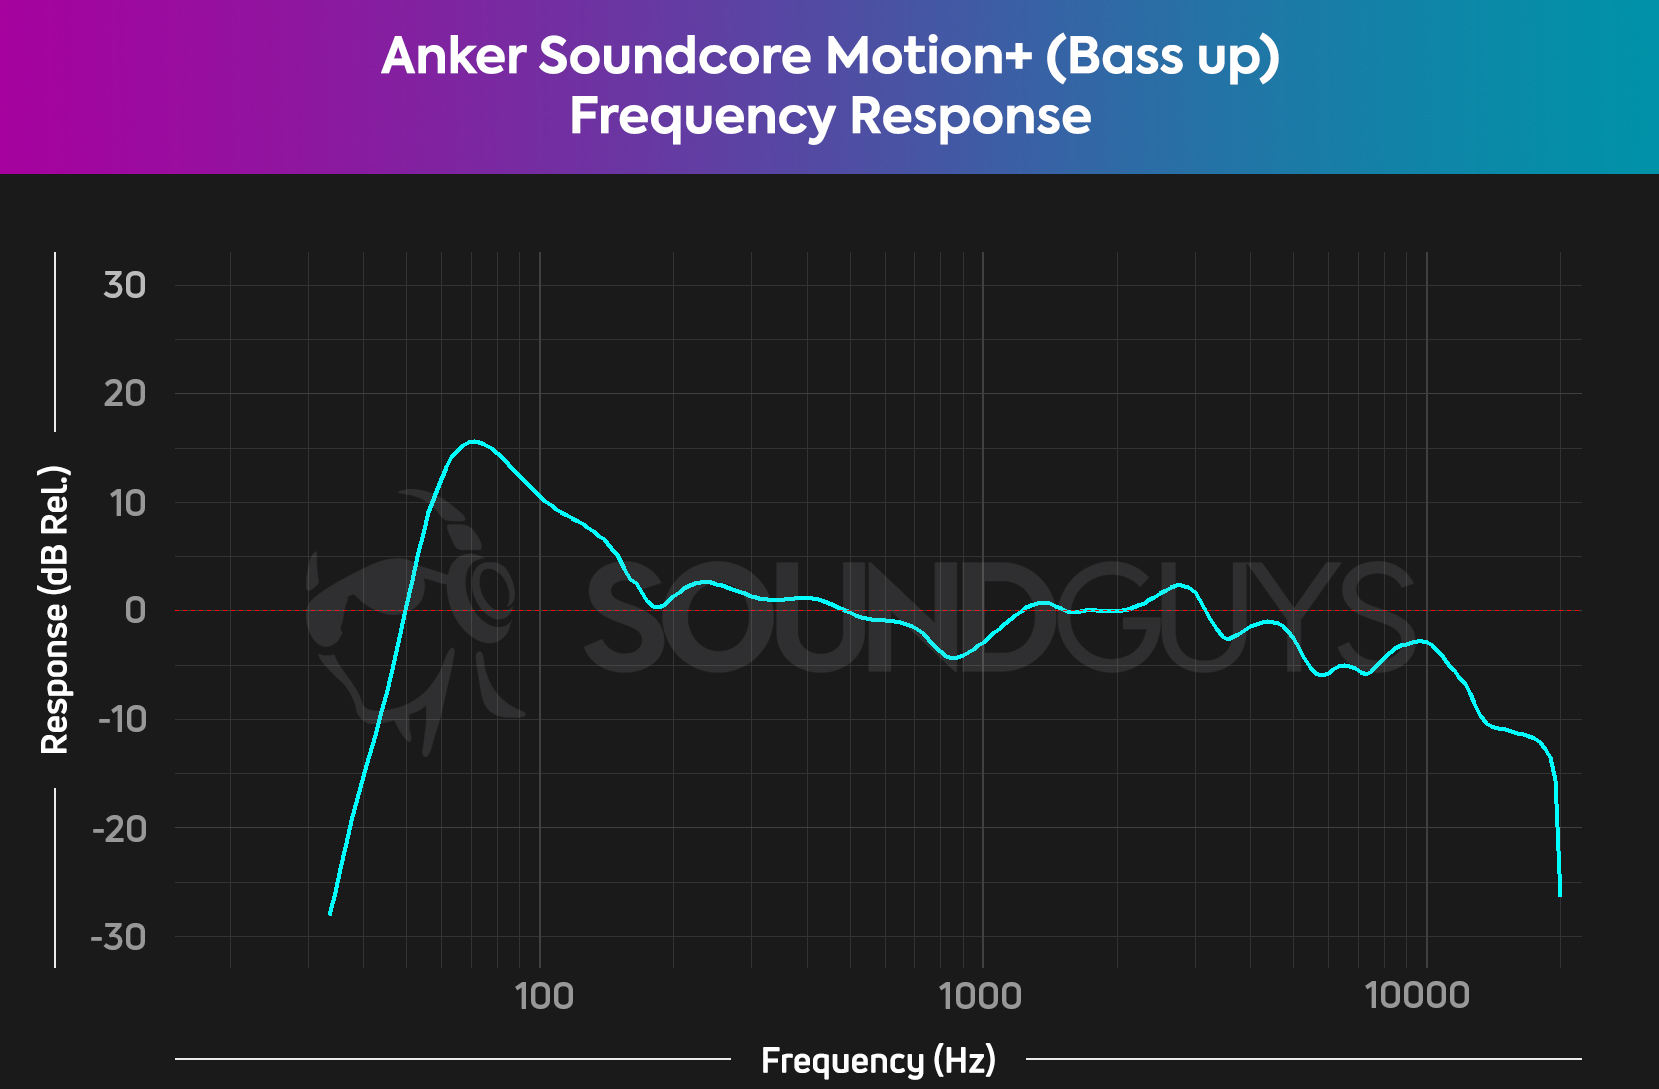 A chart depicts the frequency response for the Anker Soundcore Motion+ Bluetooth speaker with the Bass Up EQ enabled, which is preferable for outdoor listening.